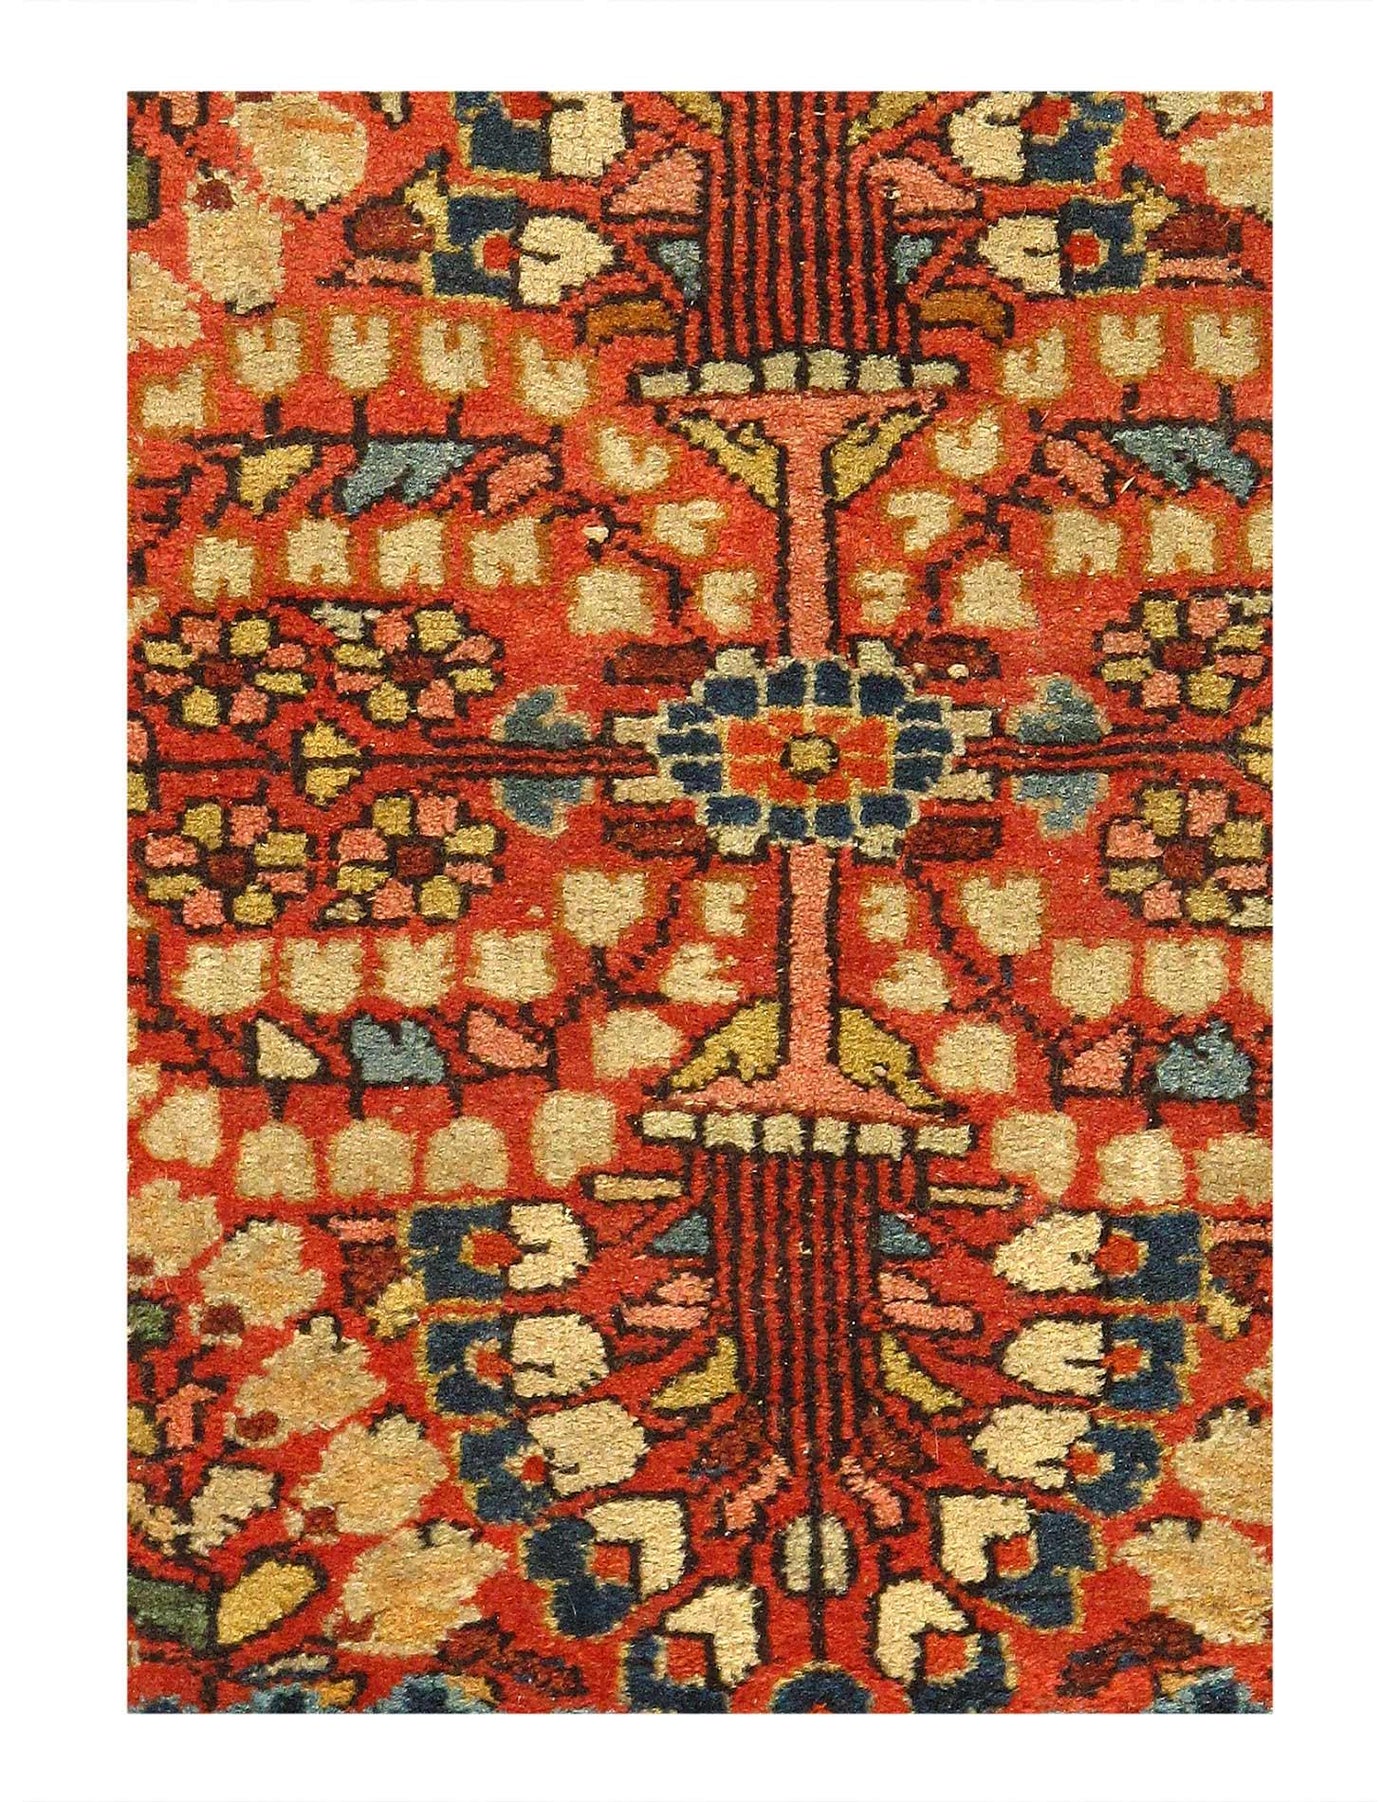 Canvello Hand Knotted Antique Persian Sarouk Rug - 2' x 2'5''